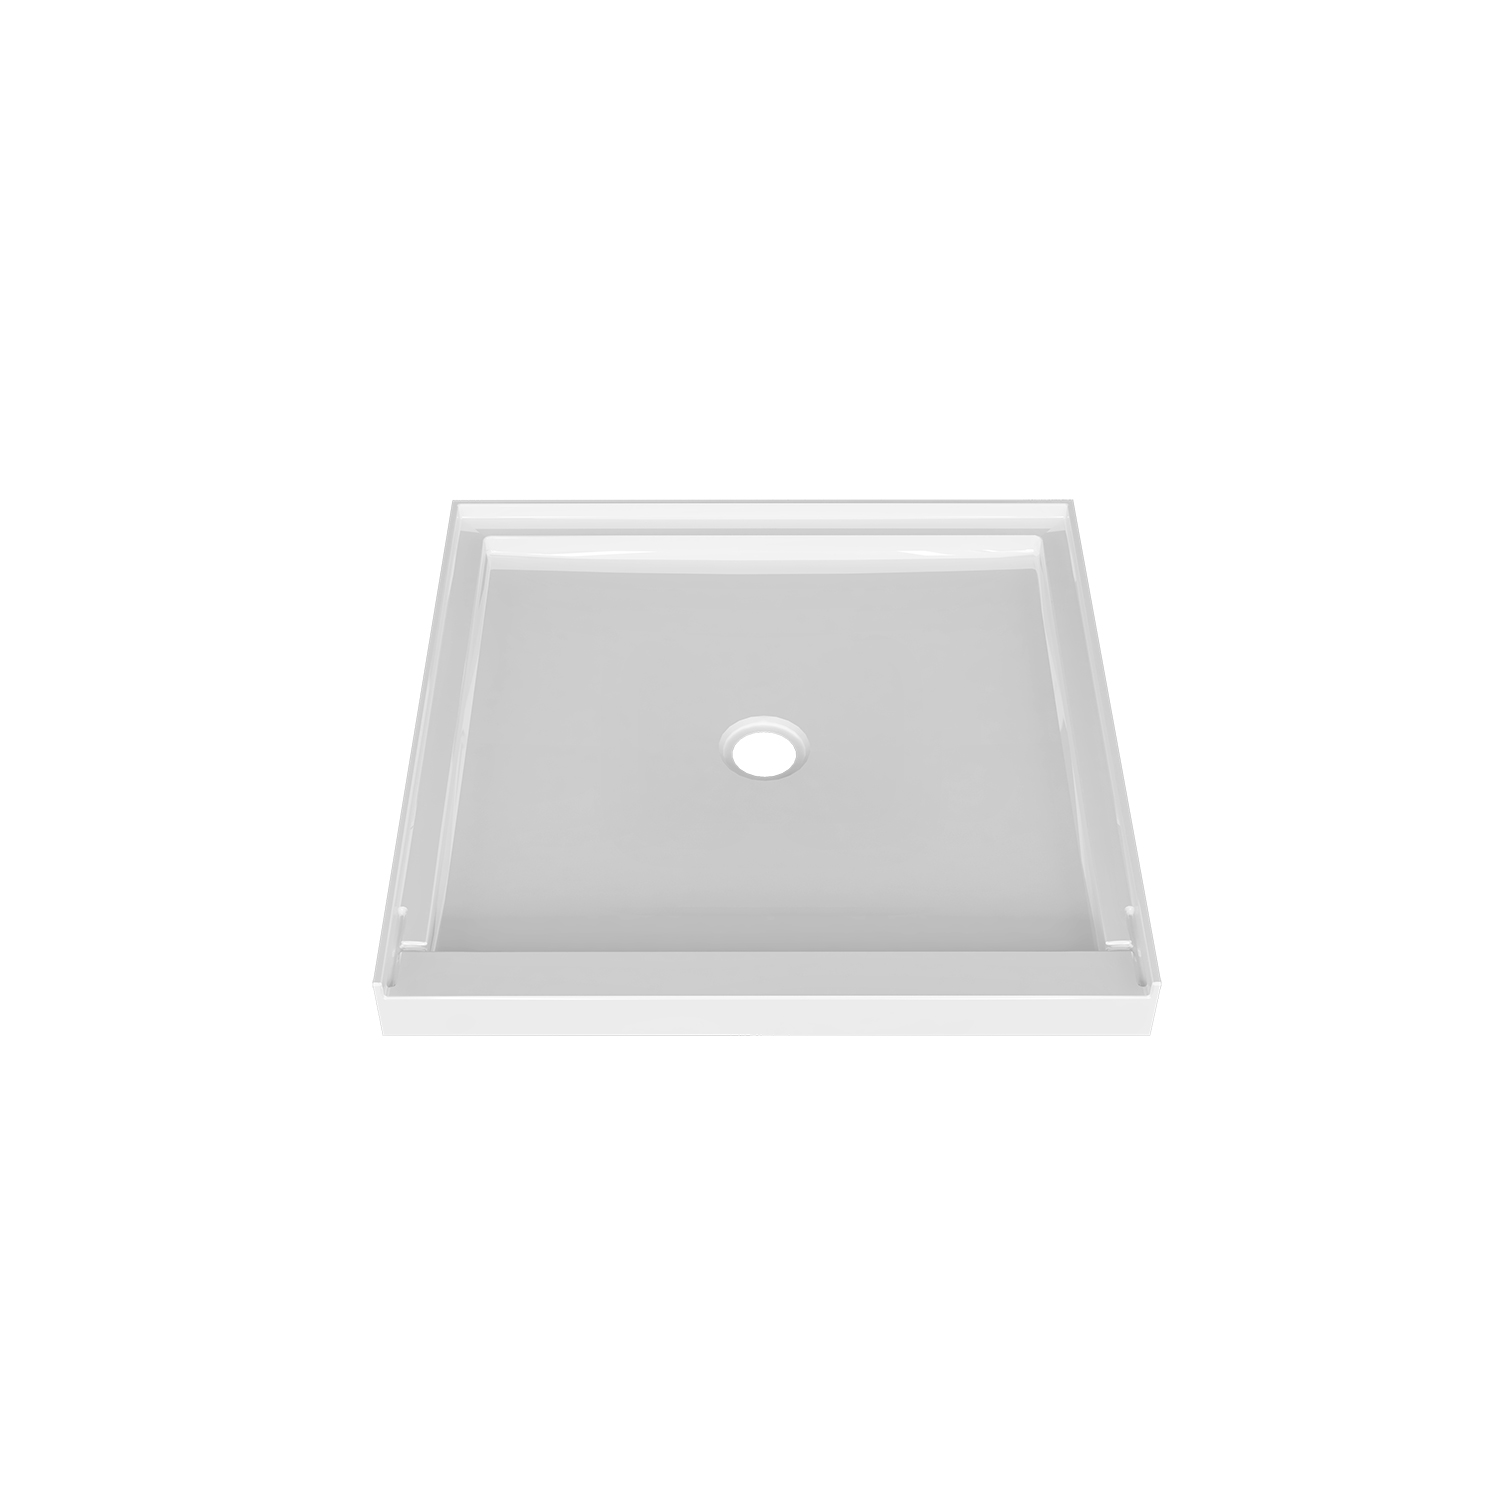 Shower base 32 x 32, in alcove, in glossy white